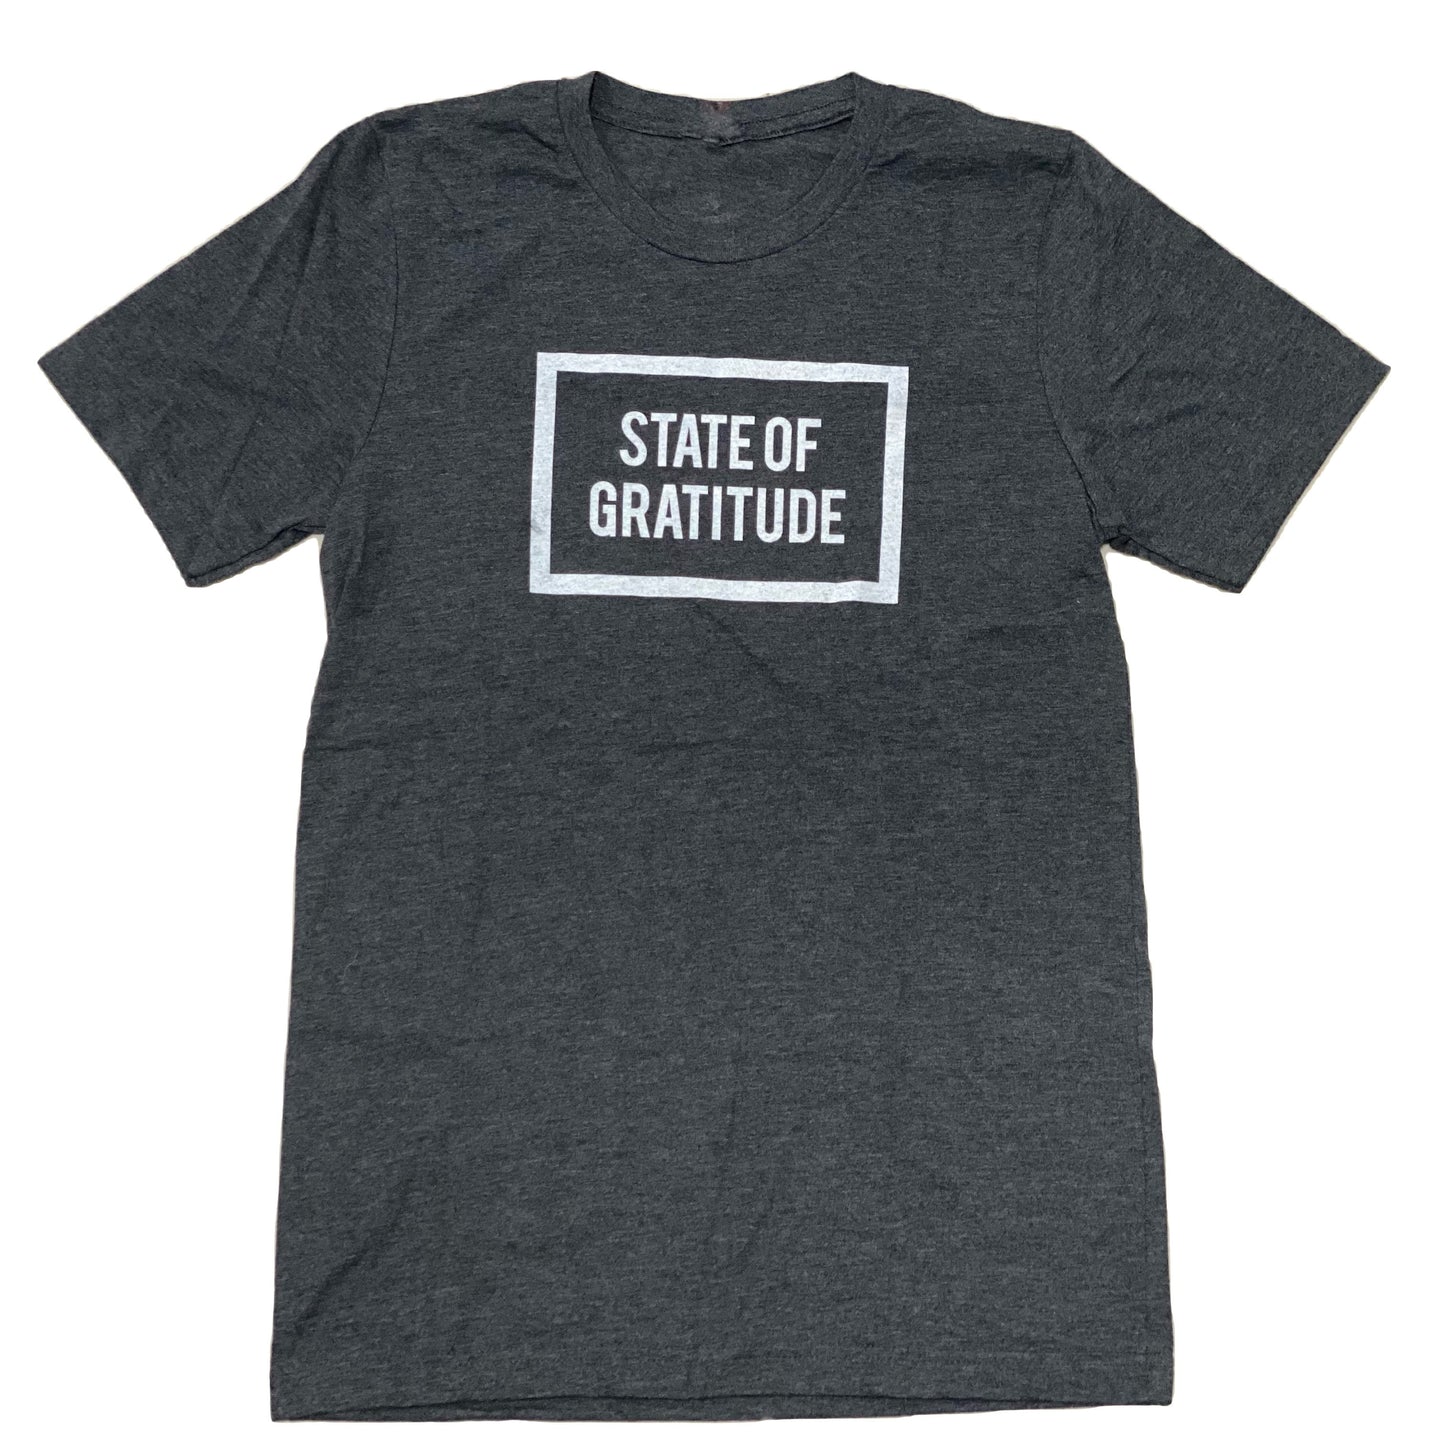 State of Gratitude Unisex, Men's and Women's Heather Grey Top and White logo on front and back with blend material. Athletic fitting. Yoga and Wellness inspired